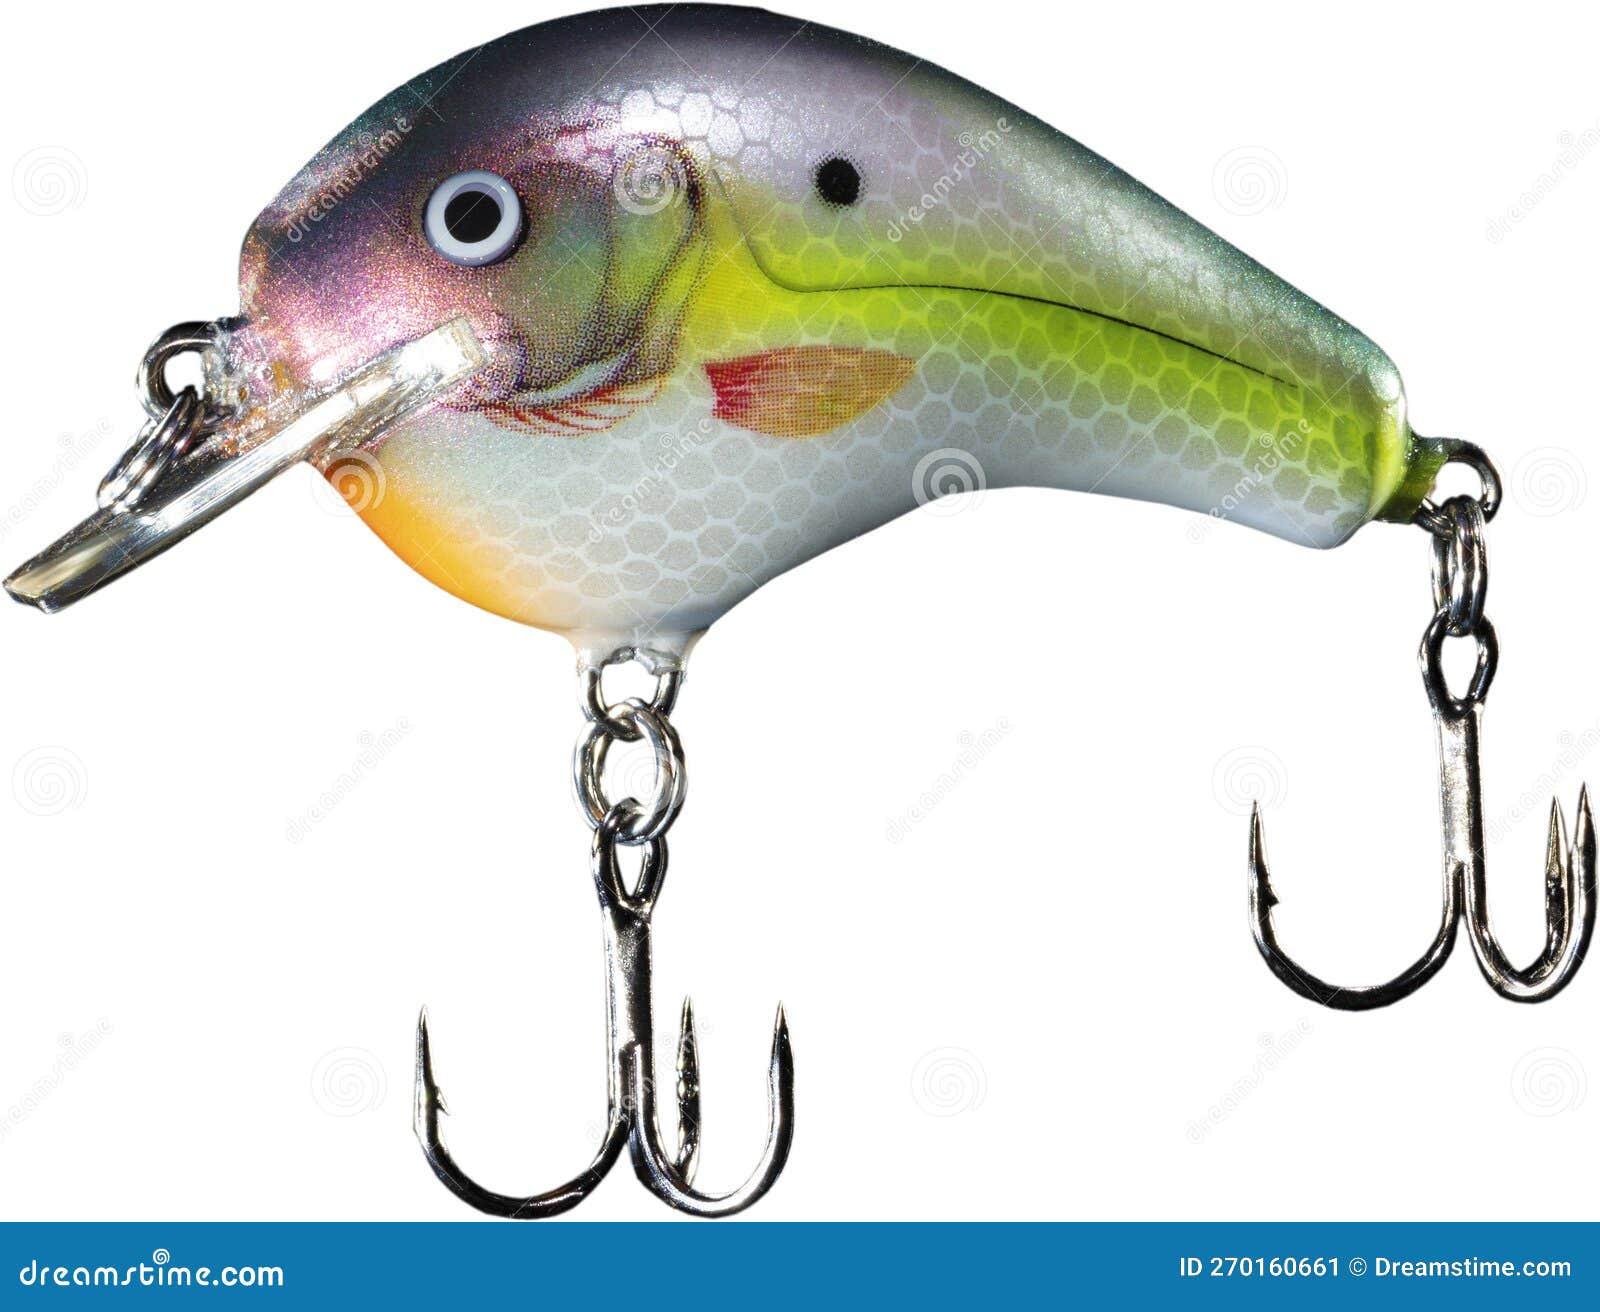 Artificial Bait for Fishing Stock Image - Image of gear, fishing: 270160661